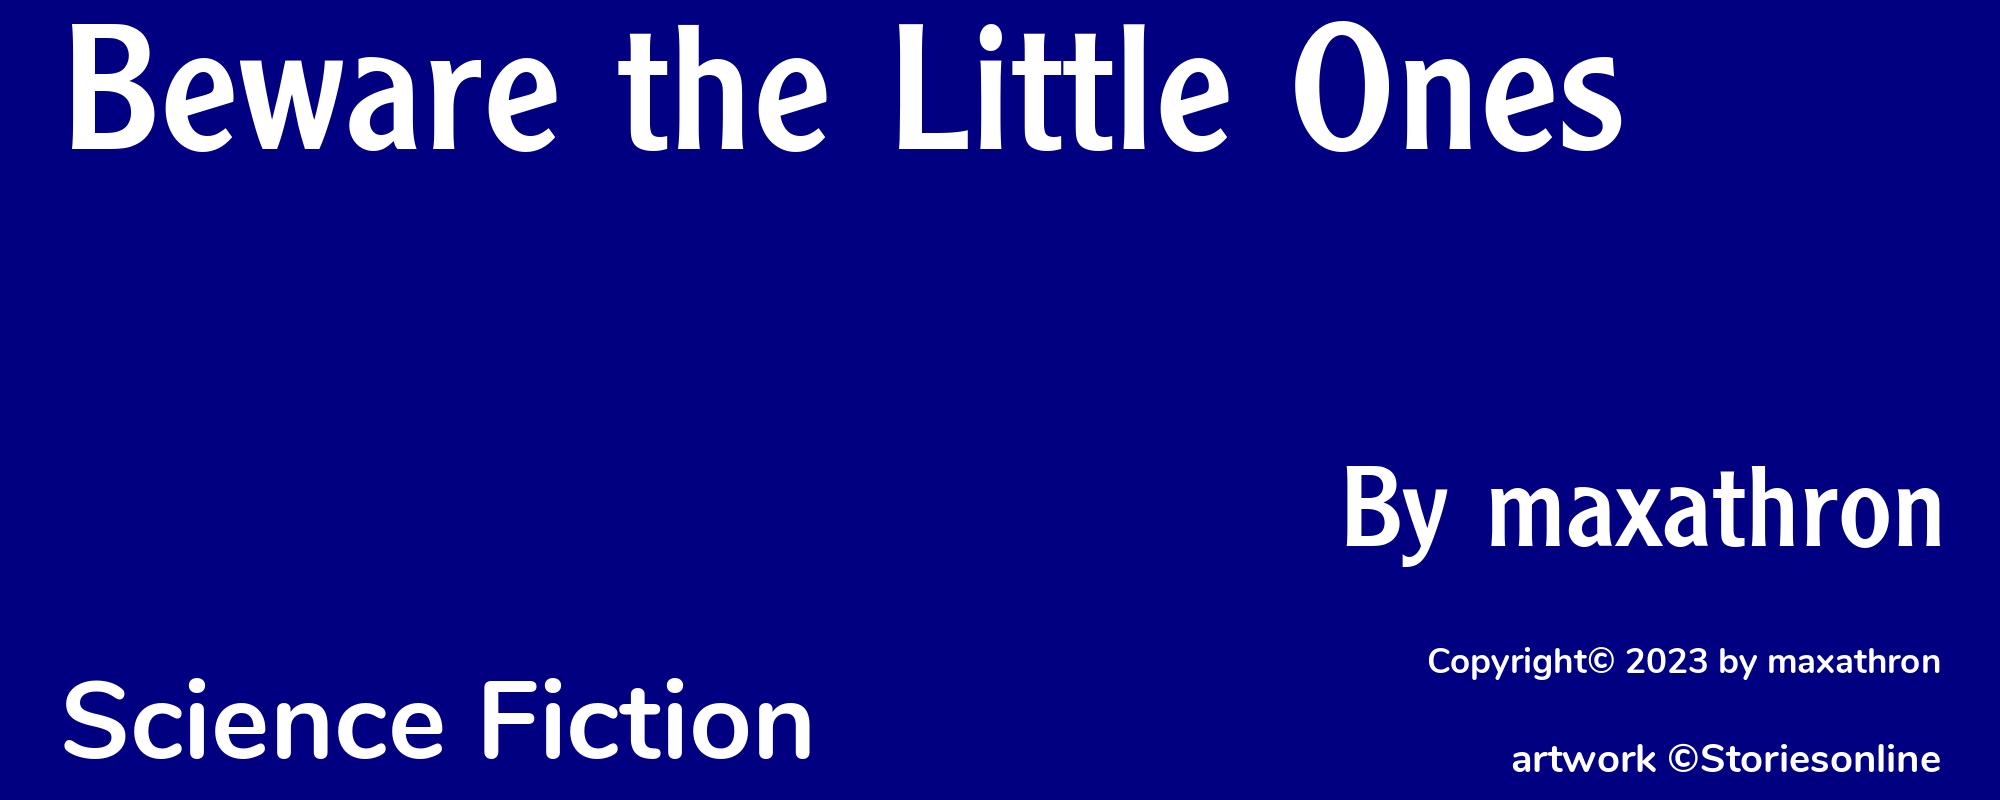 Beware the Little Ones - Cover